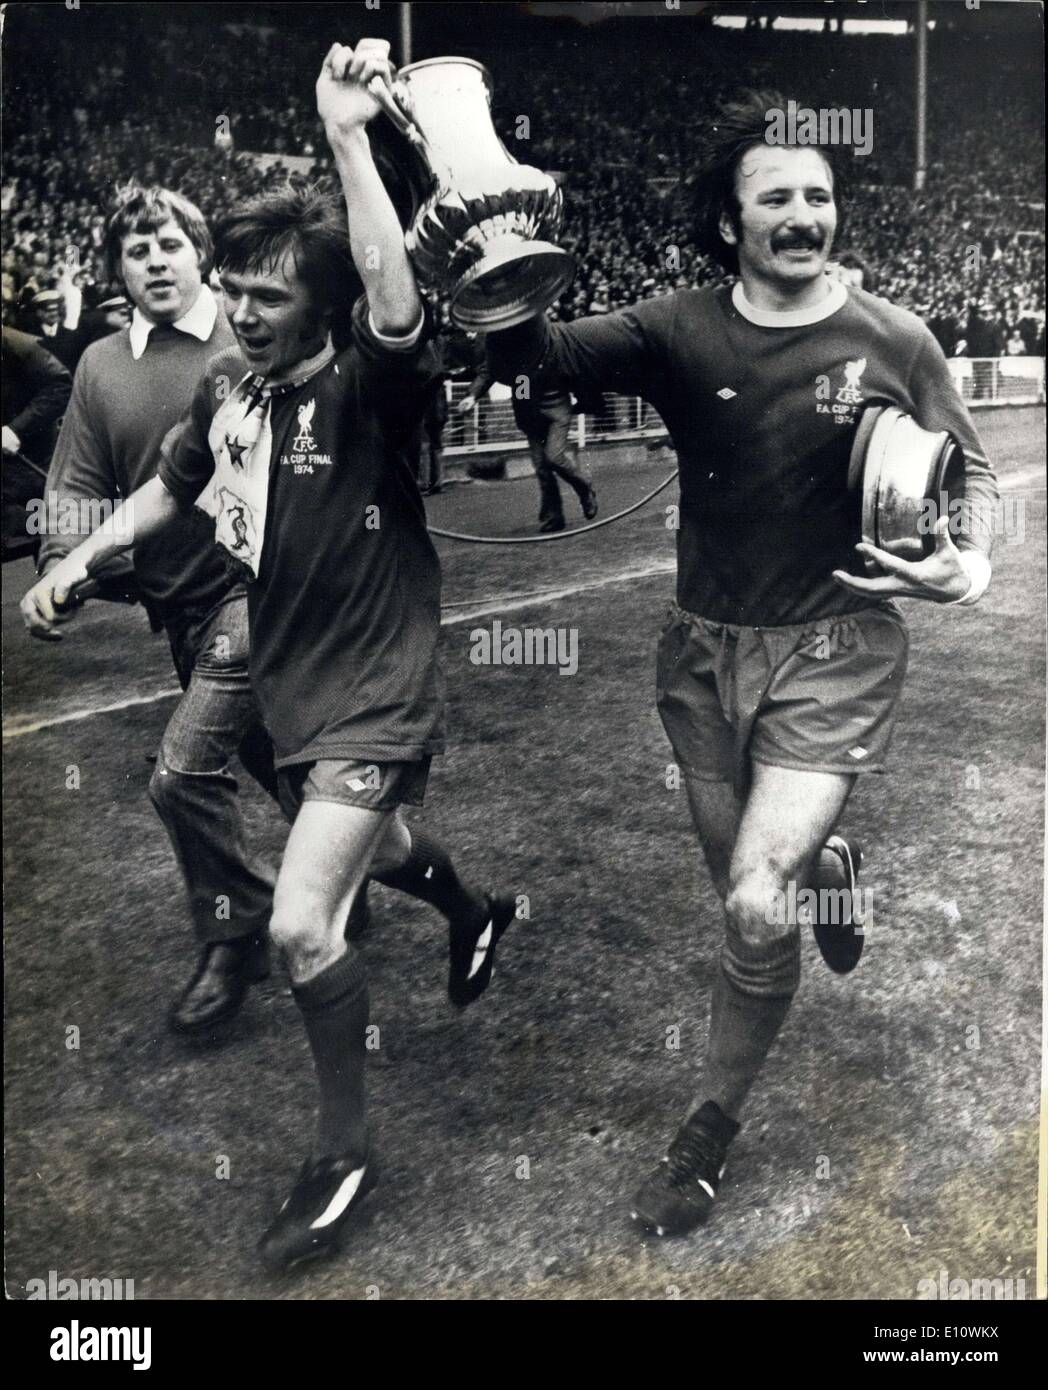 May 04, 1974 - F.A. cup final at Wembley: Liverpool beat Newscastle 3-0. Photo shows Brian Hall (left) and Tommy Smith of Liverpool, hold the F.A. Cup aloft, as they ran round the ground at Wembley today, after beating Newcastle 3-0 in the F.A. Cup Final. Stock Photo